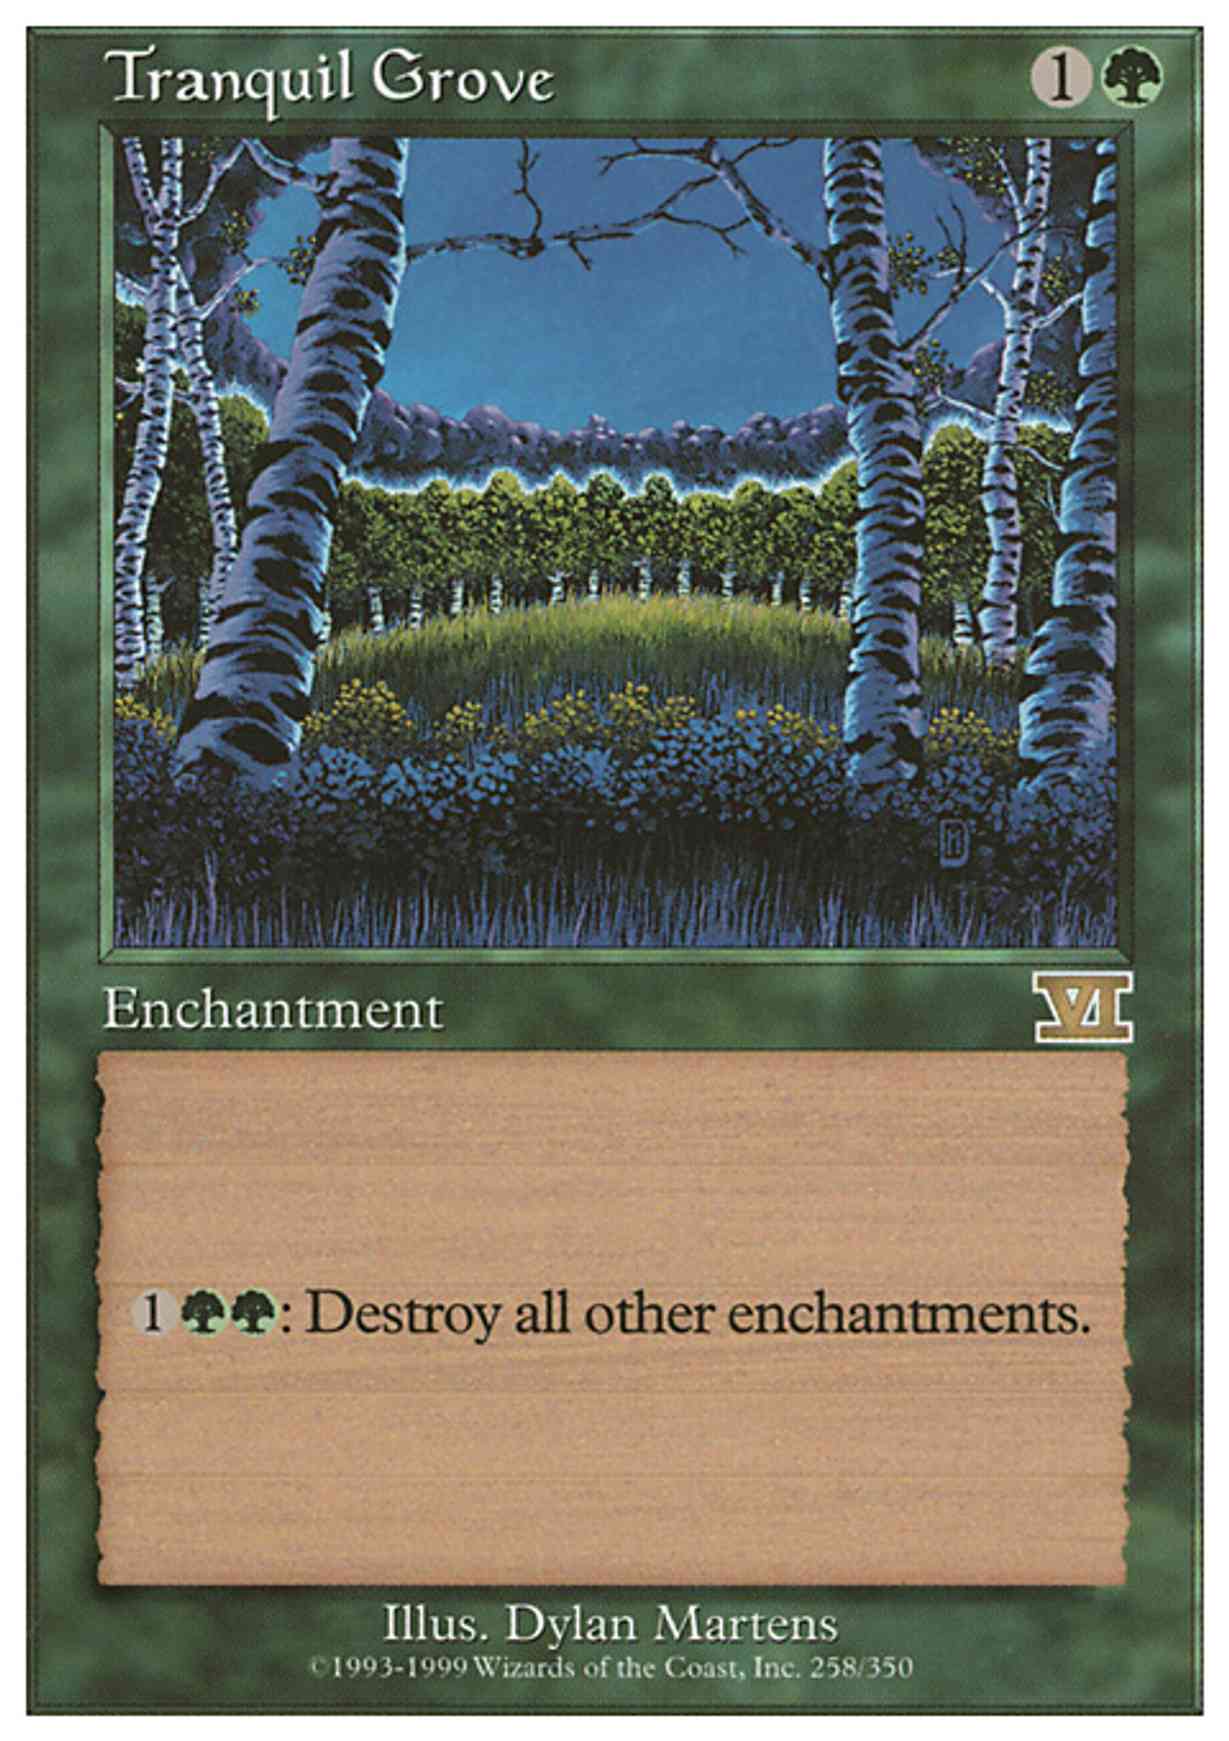 Tranquil Grove magic card front